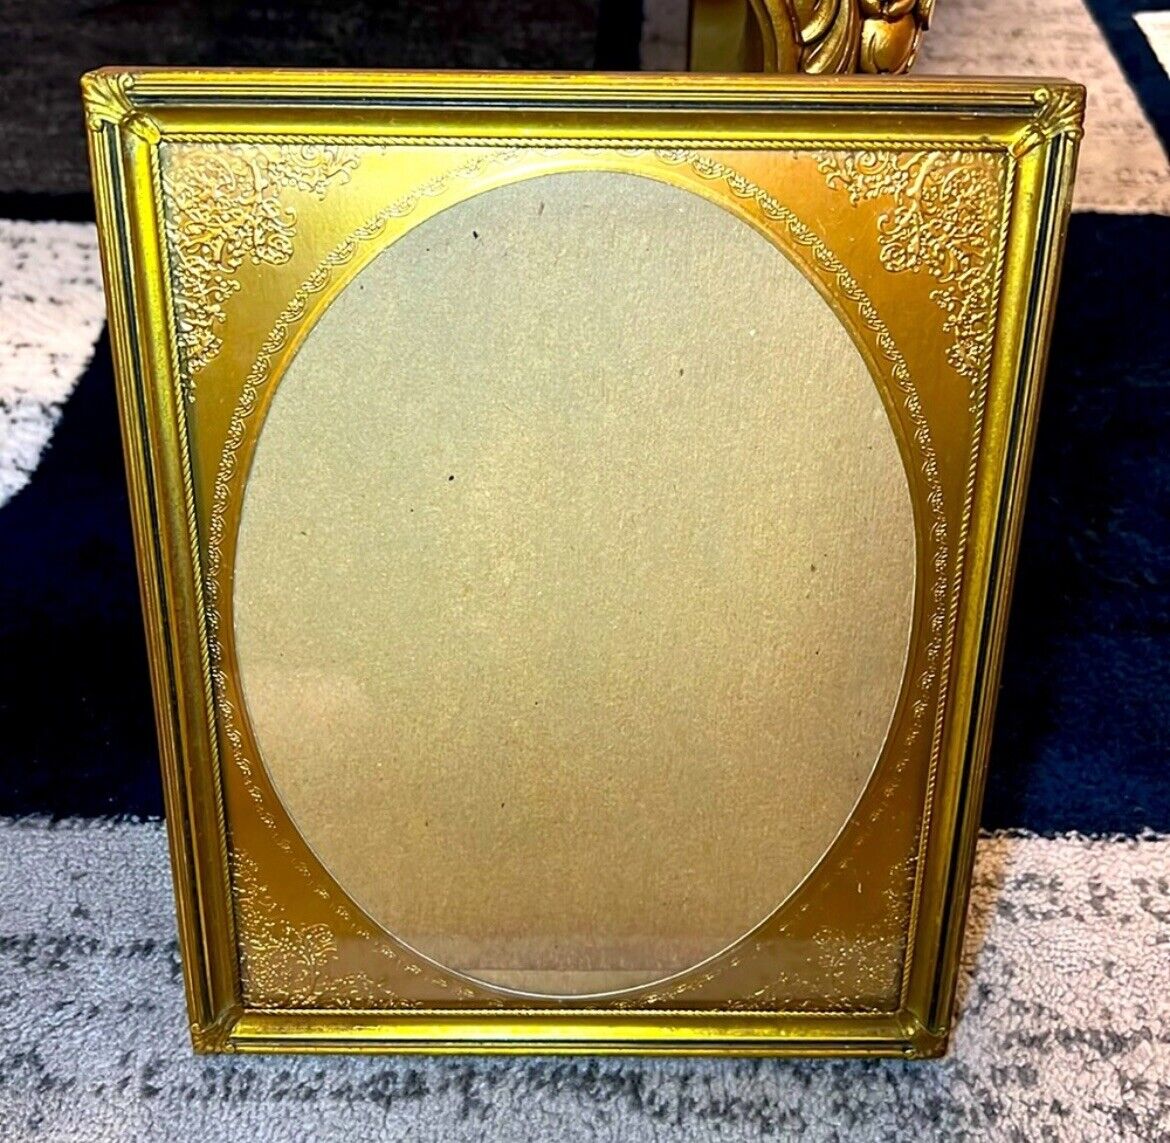 VINTAGE ART DECO STYLE GOLD BRASS RING PICTURE FRAME 1950s EMBOSSED 8” X 10”